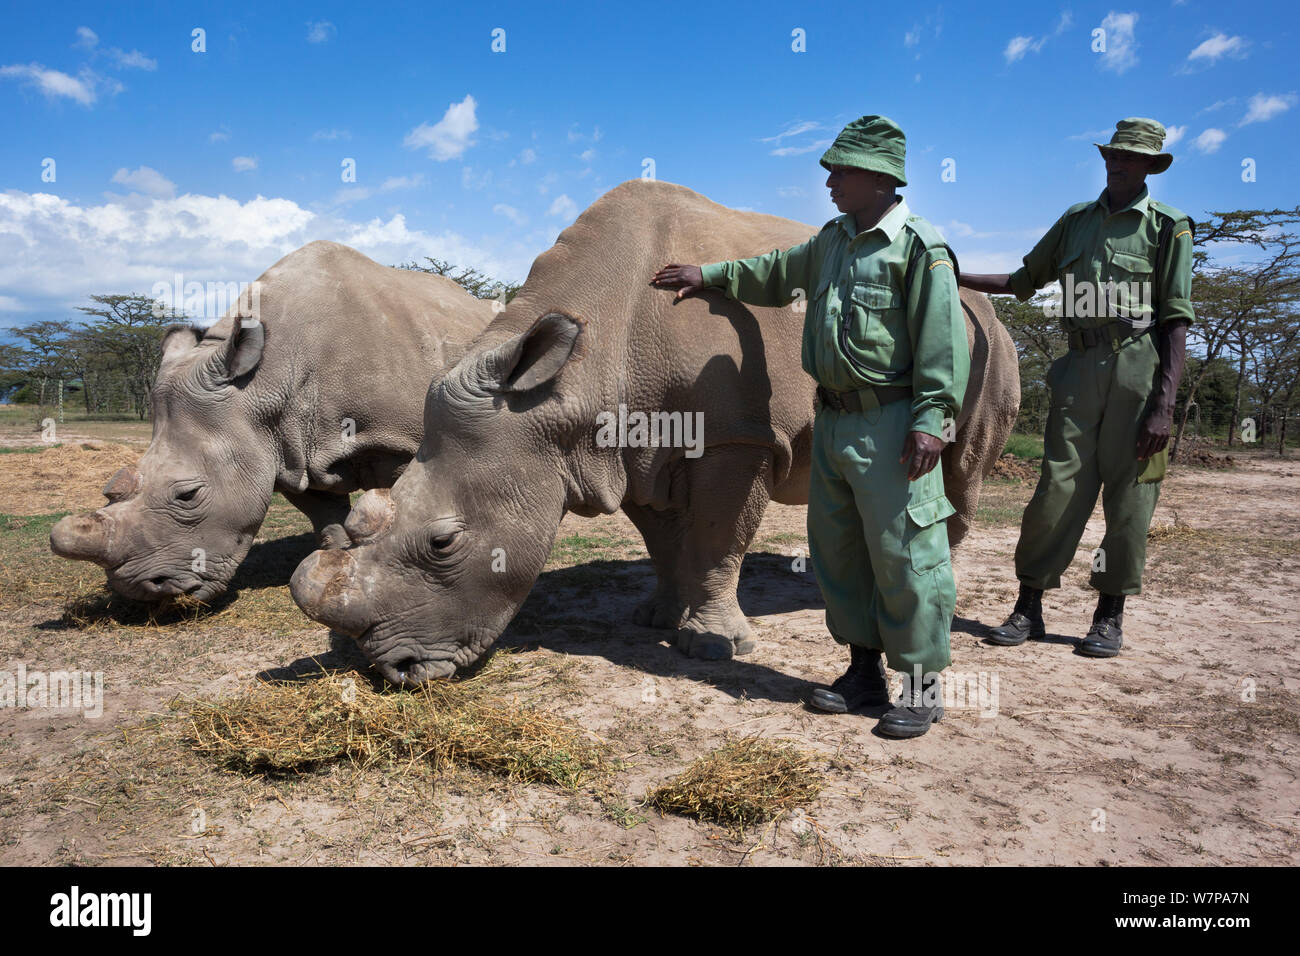 Northern white rhino (Ceratotherium simum cottoni) male called Suni with female Najin, watched over by keepers Jeremy Kimathi and Peter Esogon, Ol Pejeta Conservancy, Laikipia, Kenya, Africa, September 2012 Stock Photo